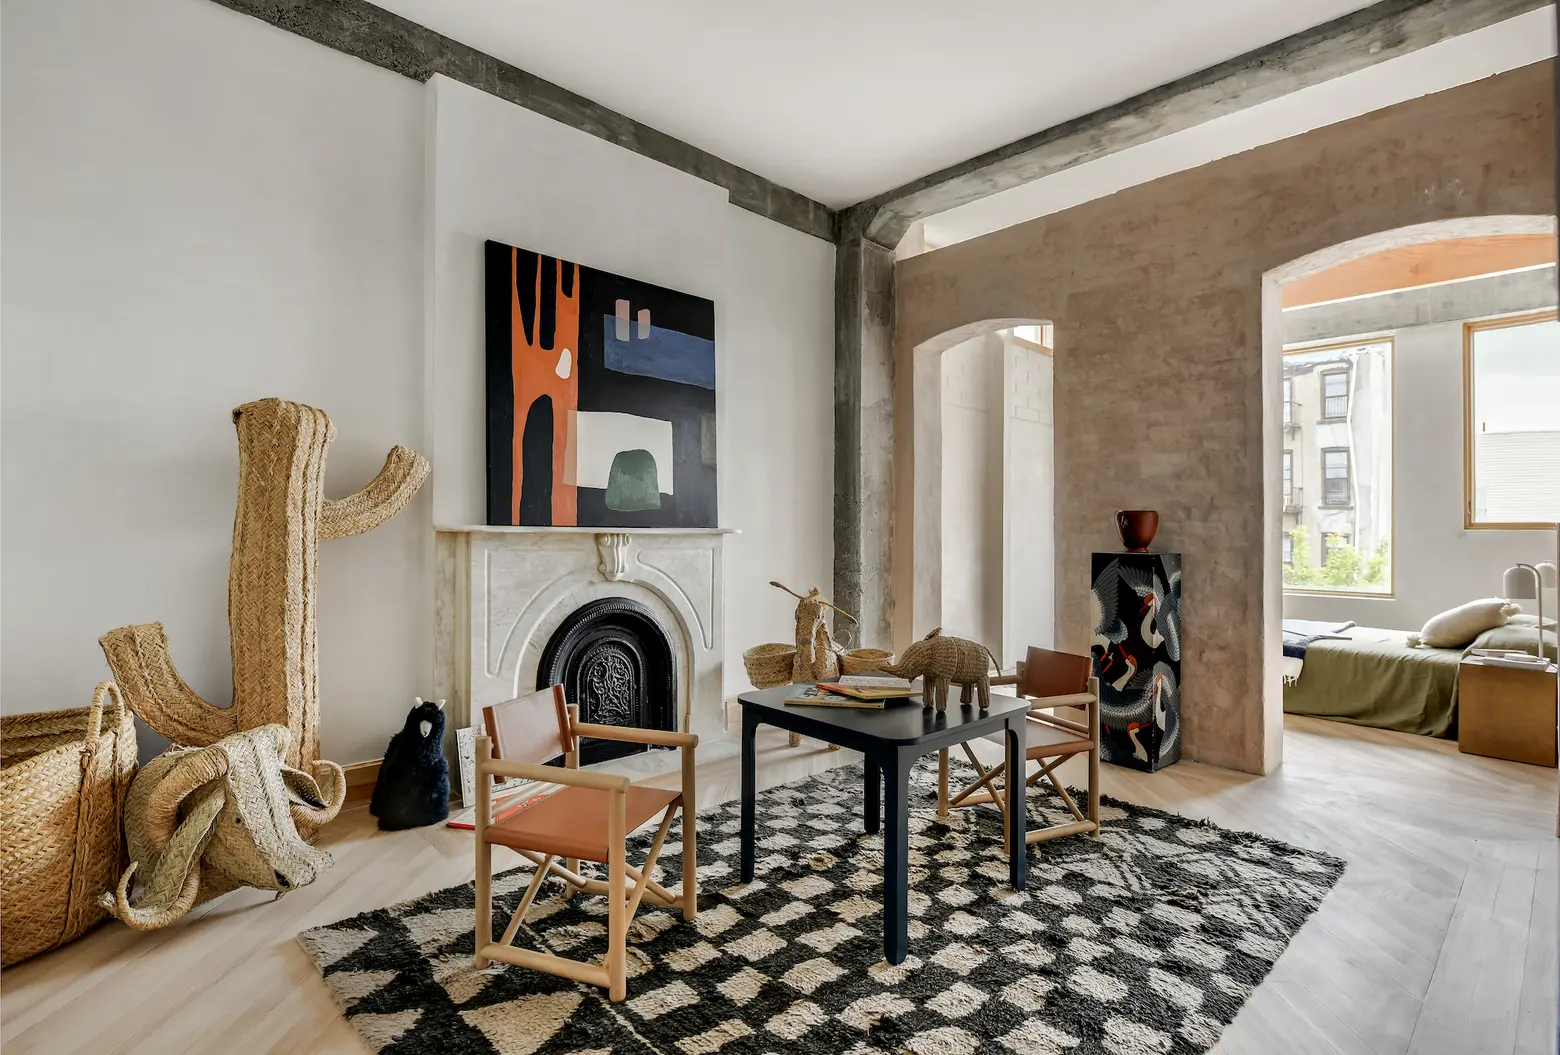 Full of raw materials and Scandinavian style, this Bed-Stuy townhouse is asking $3.9M